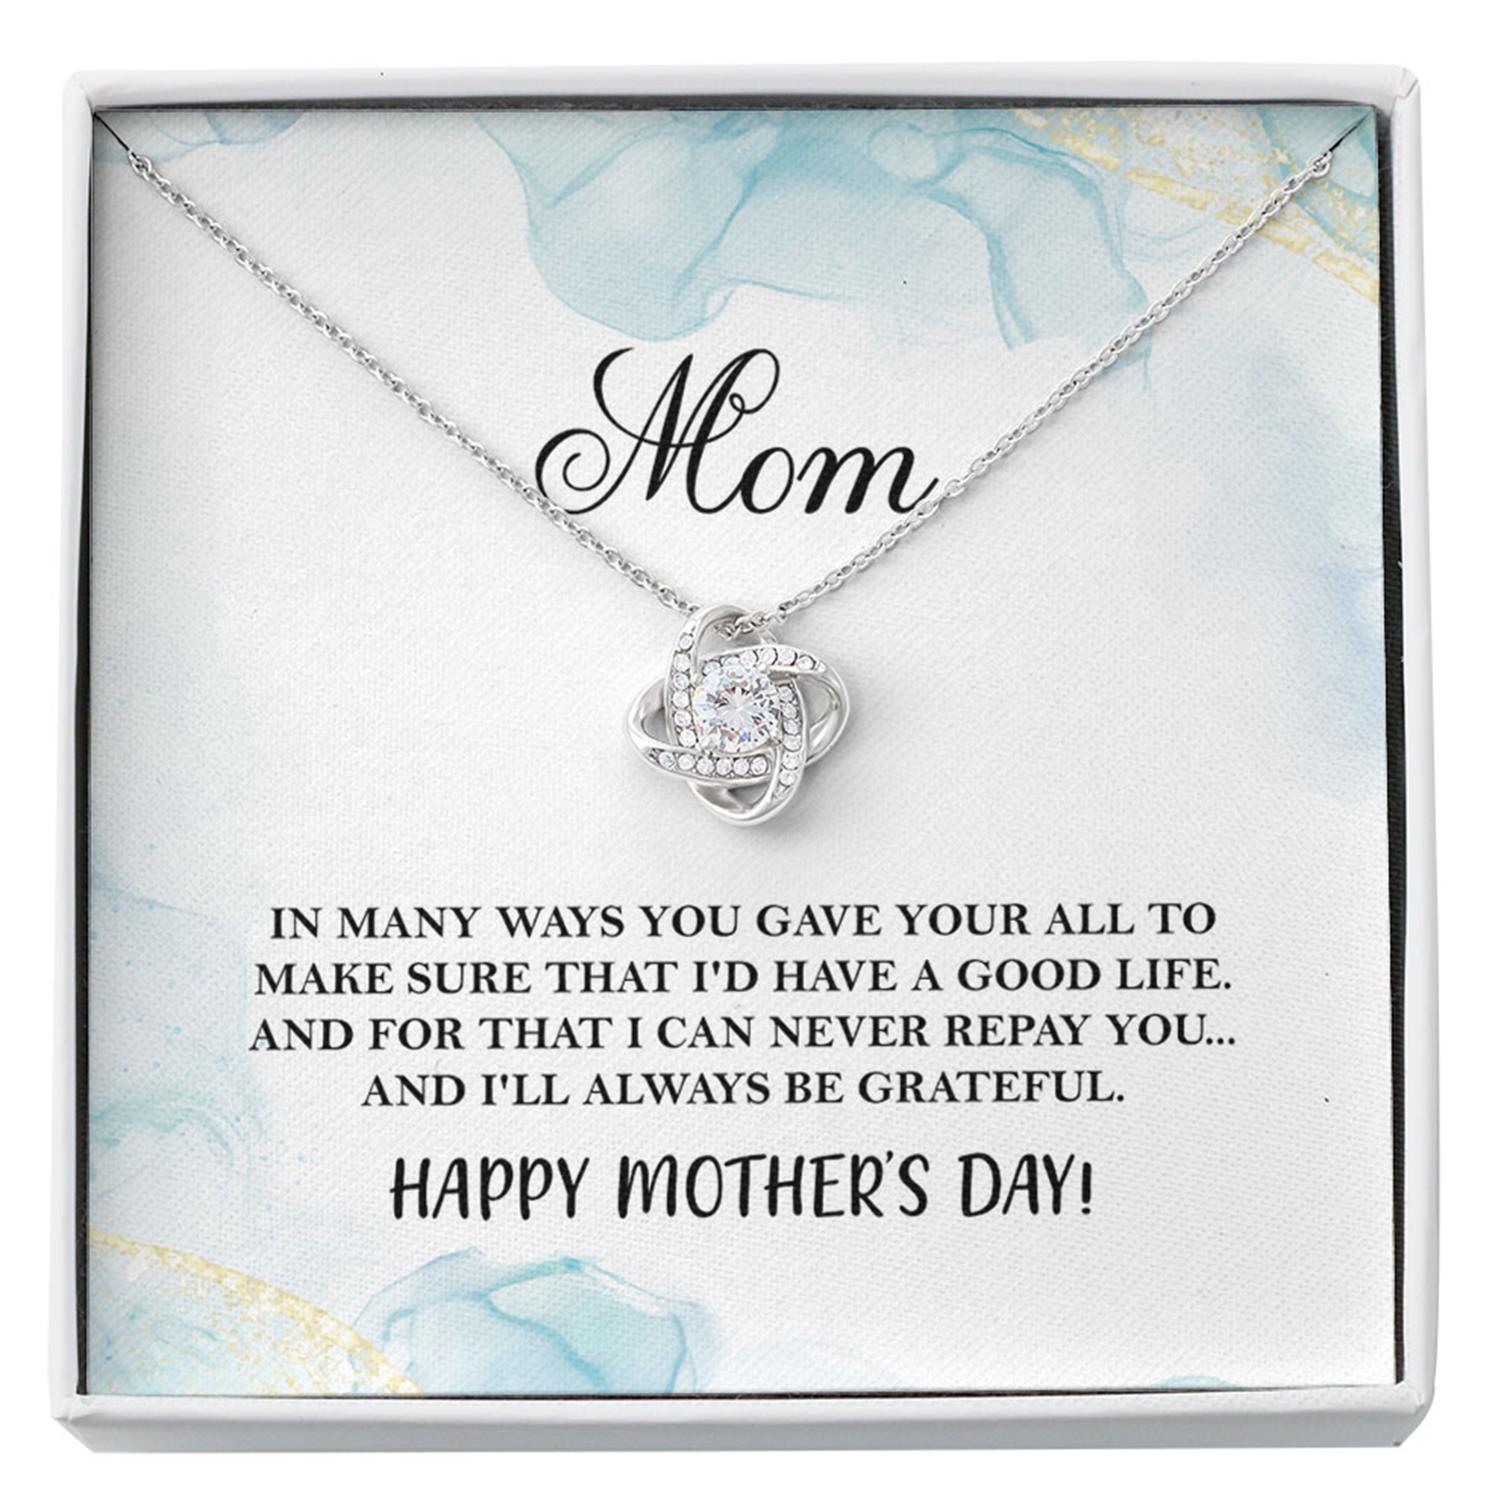 Mom Necklace - Always Be Grateful - Gift For Mom, Mother Daughter Custom Necklace